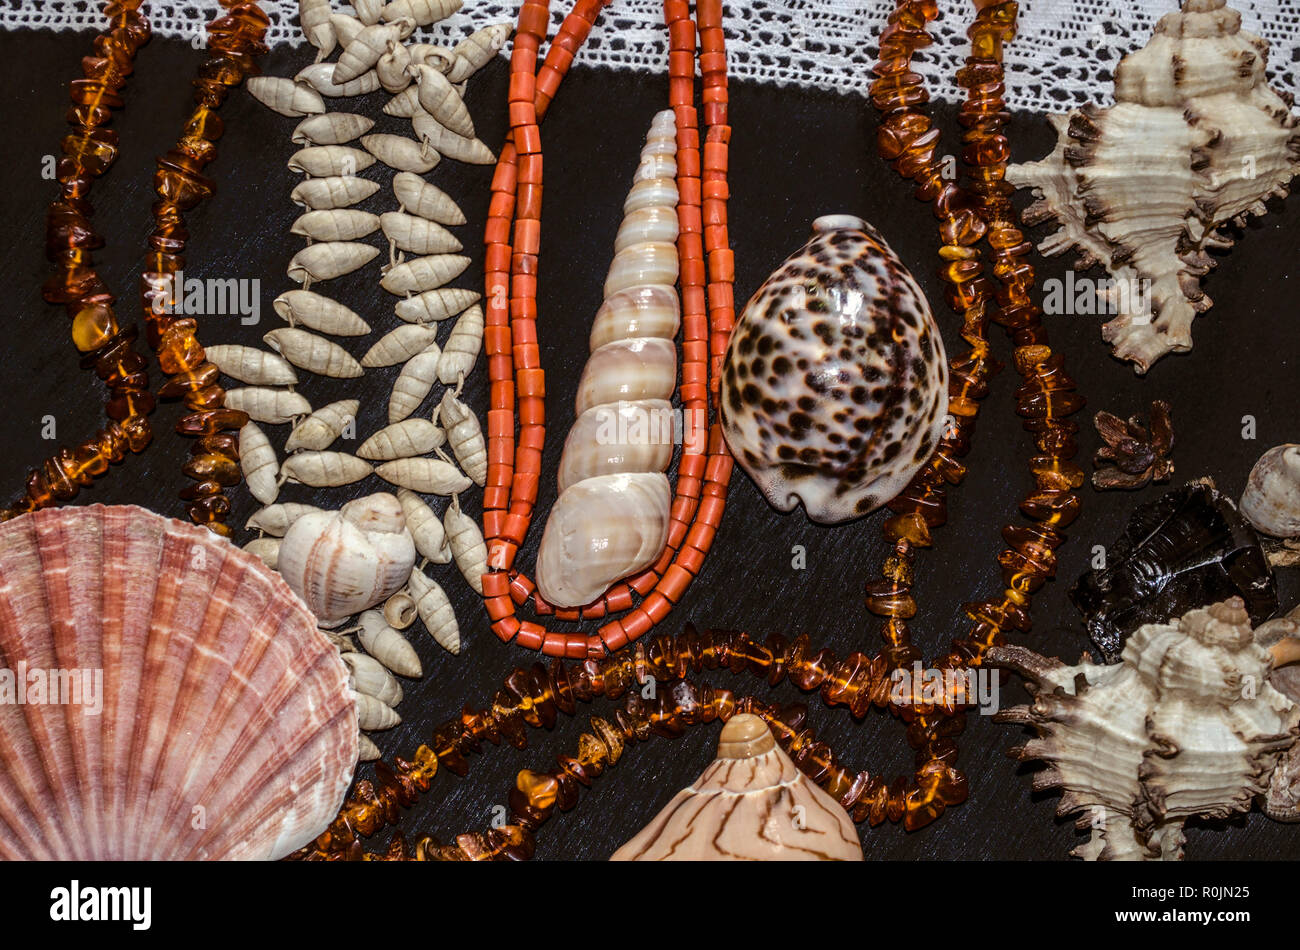 A group of shells and stones with amber and coral beads on a white openwork border lie on black plywood Stock Photo